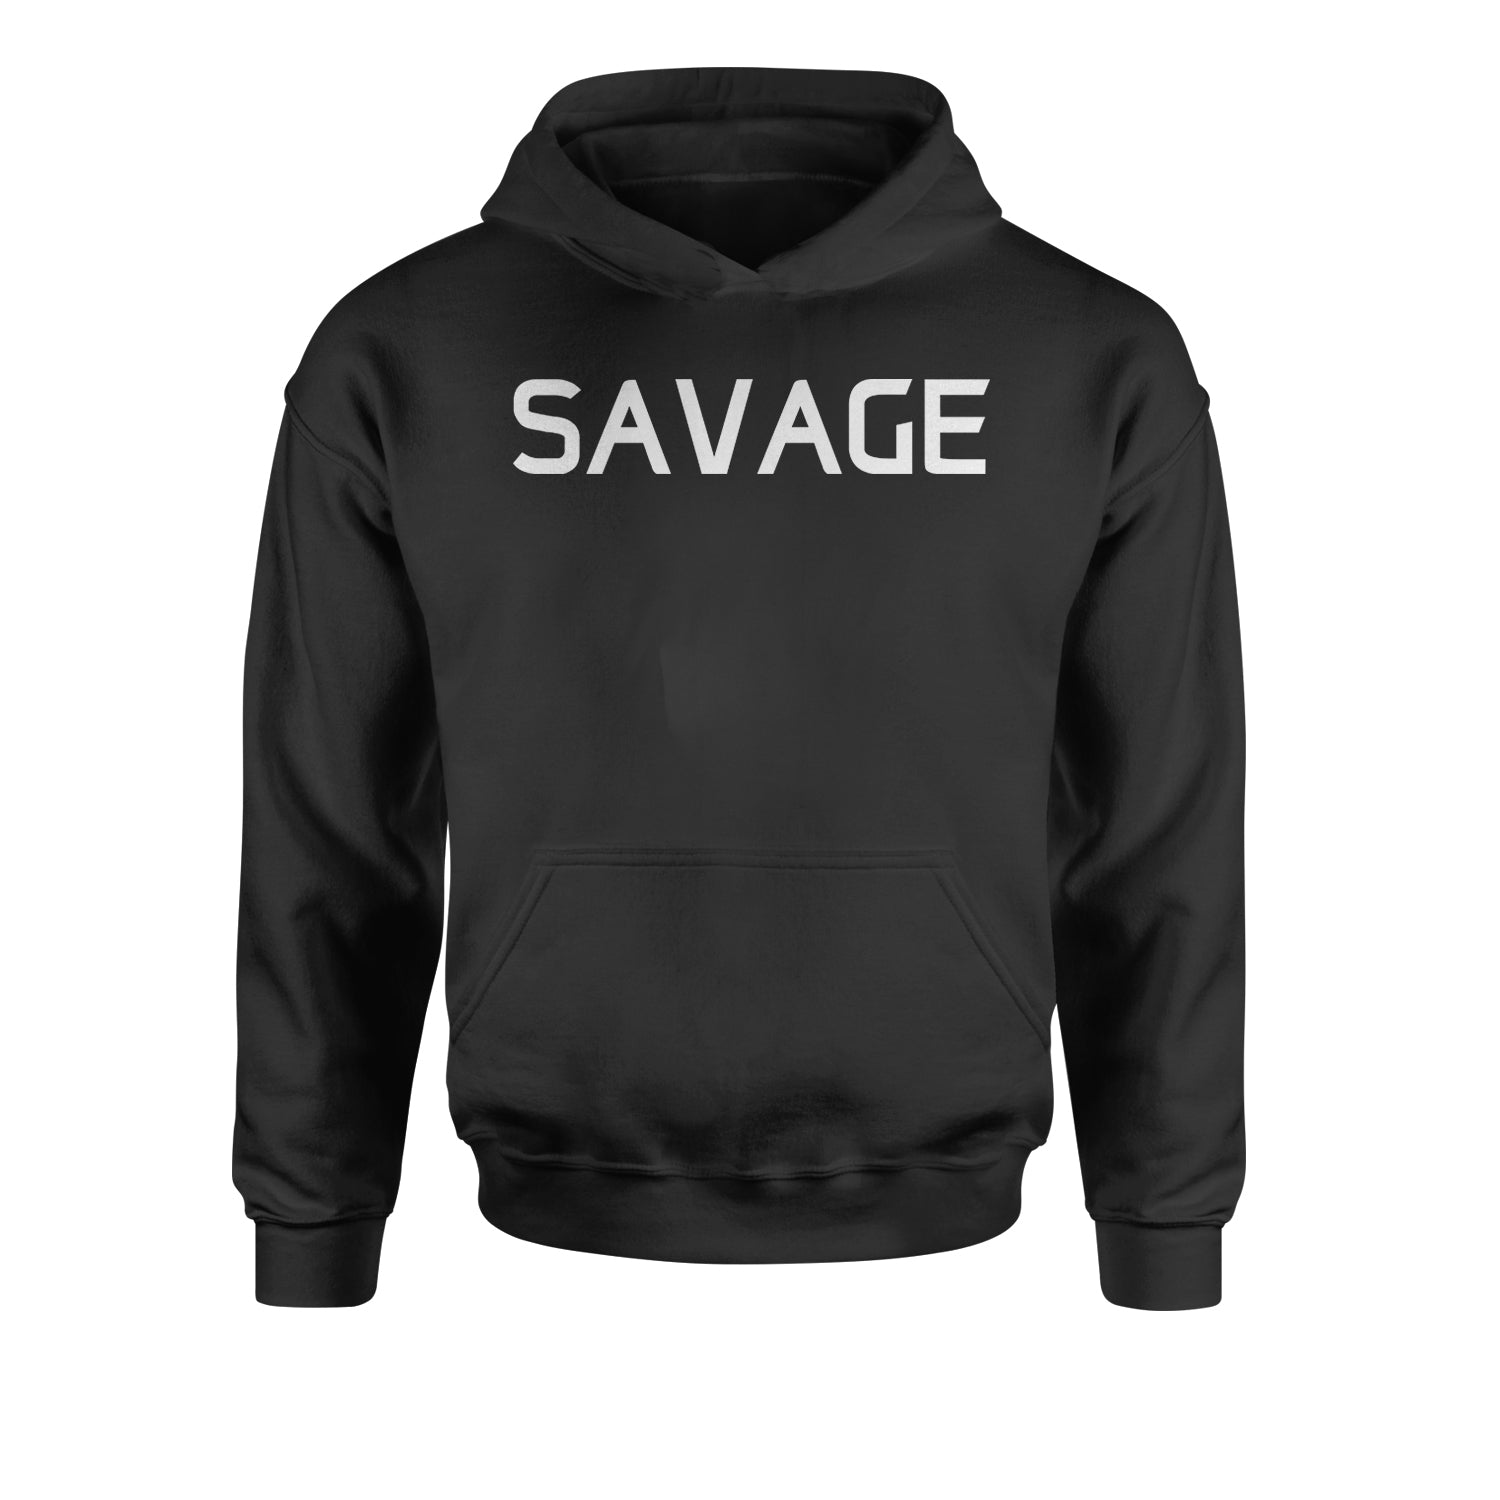 Savage Youth-Sized Hoodie #expressiontees by Expression Tees